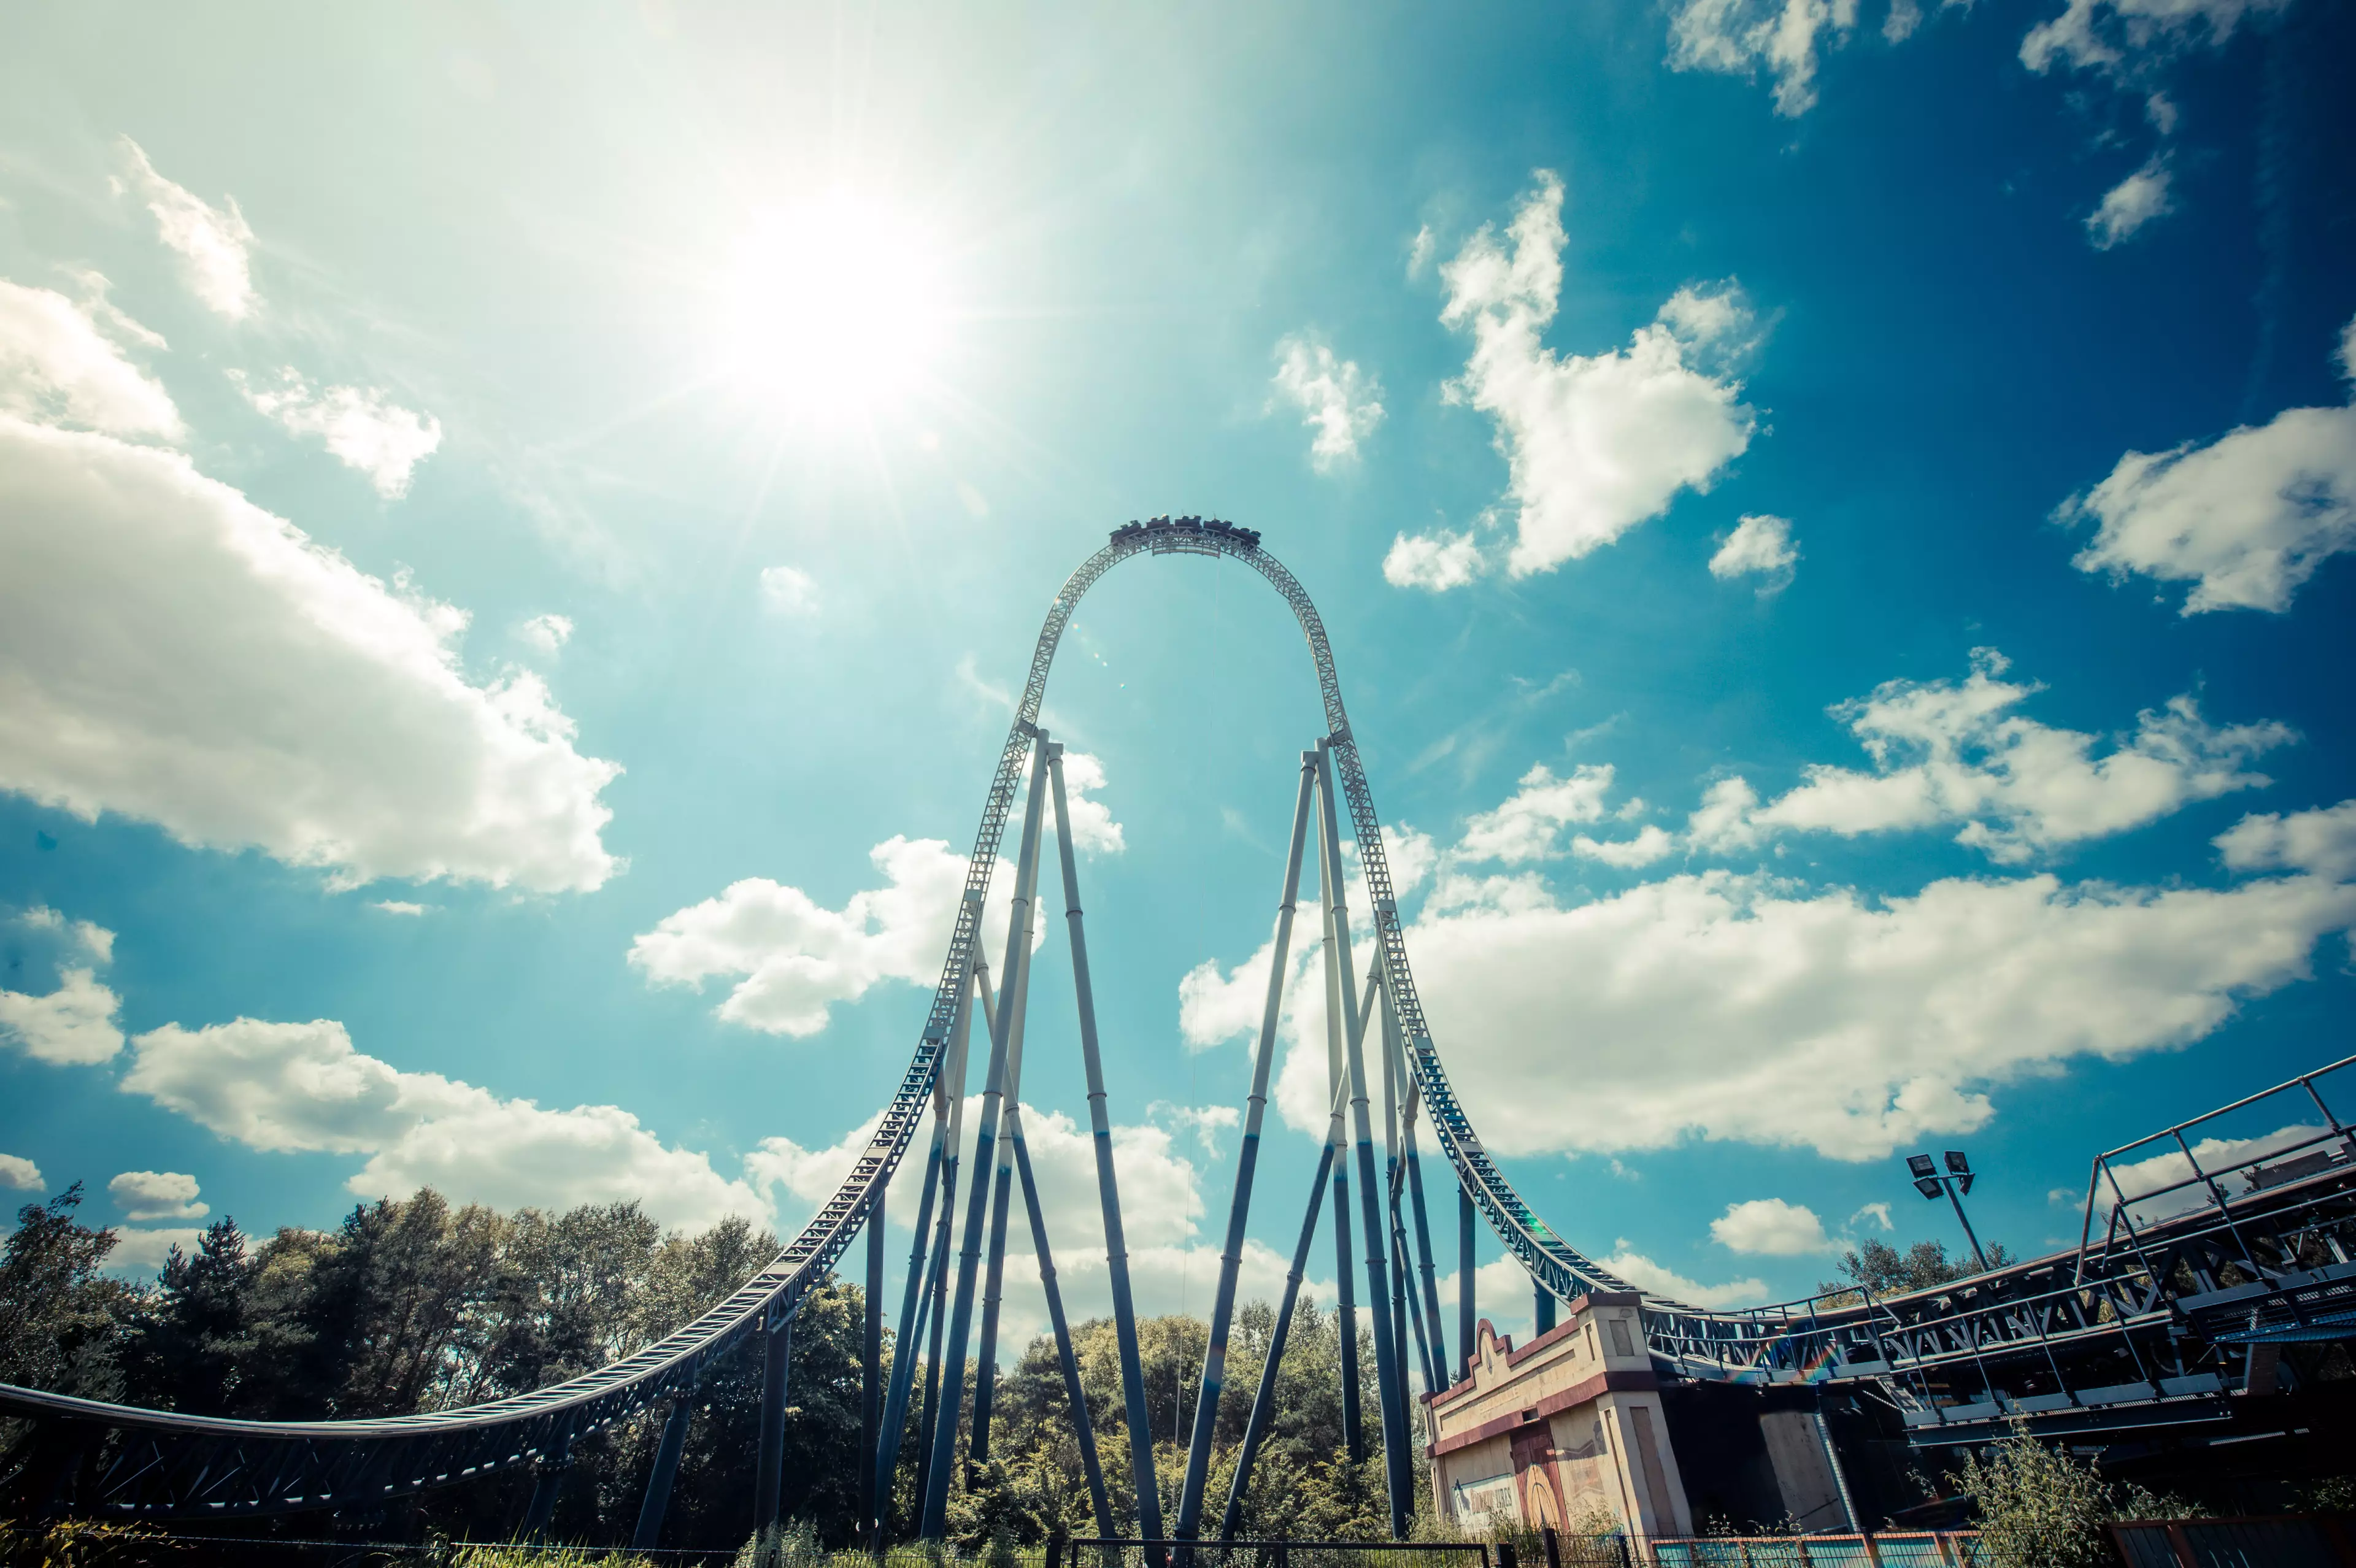 Thorpe Park reopens for 2020 on 27th March (